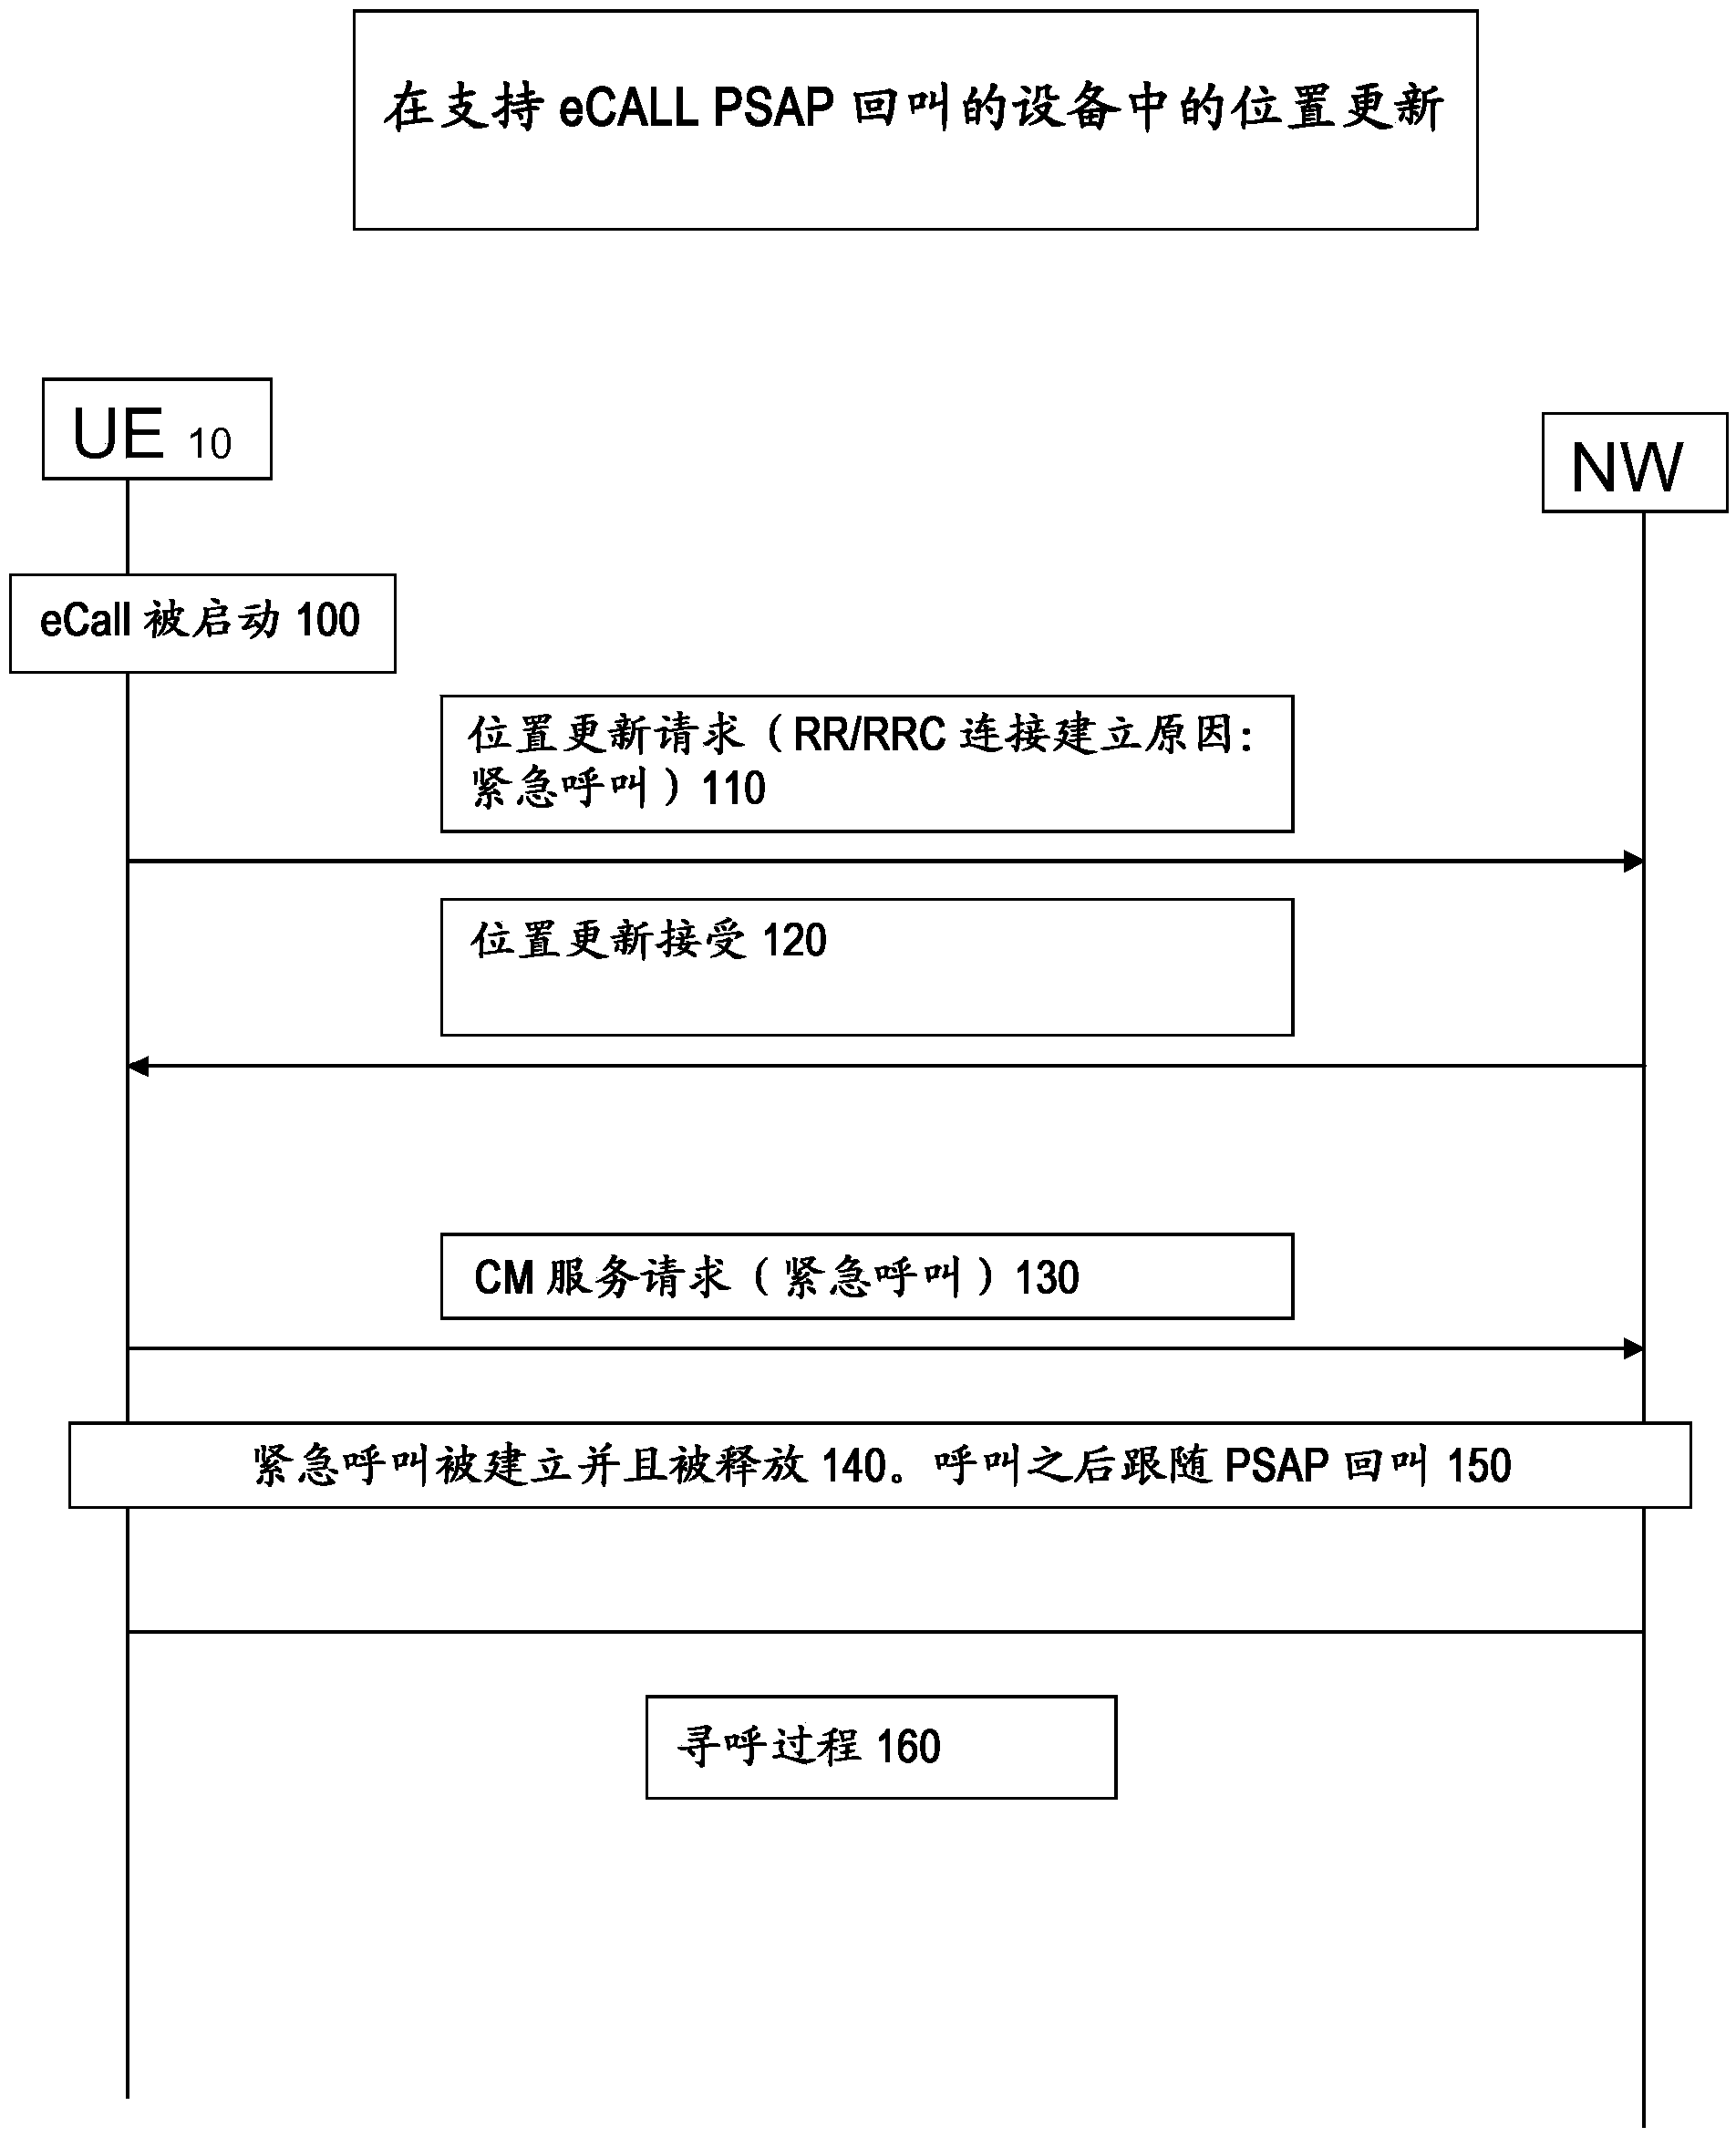 Method and processing system for attempting an emergency call by a wireless device